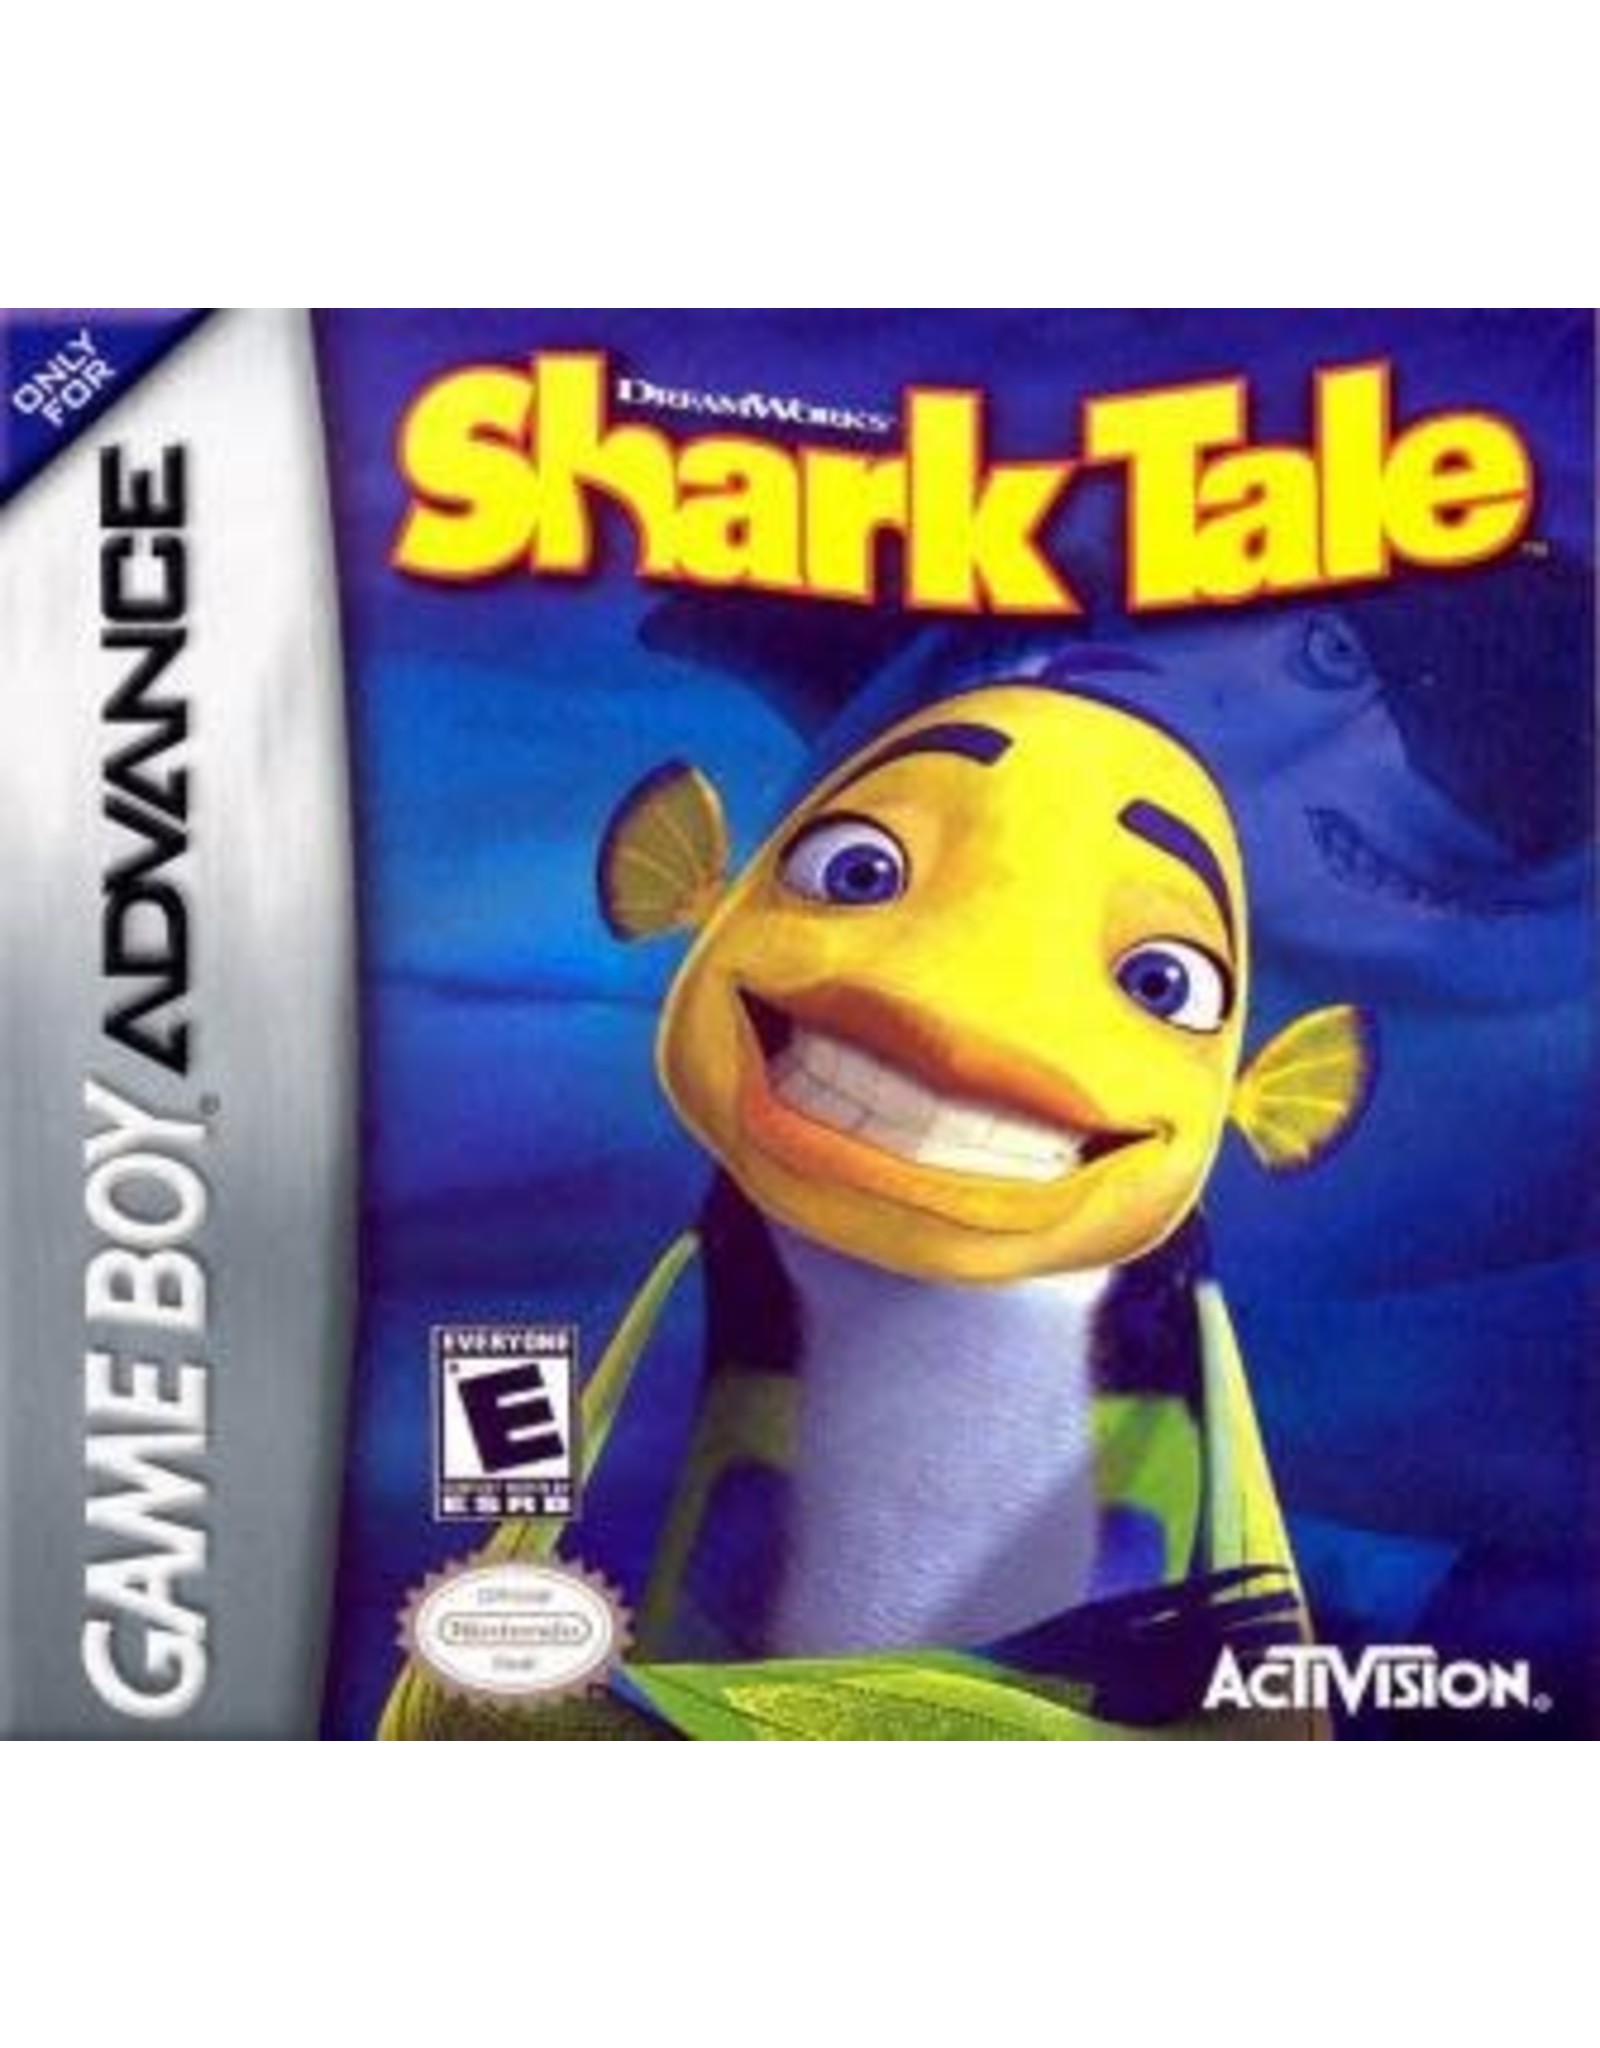 Game Boy Advance Shark Tale (Used, Cart Only)